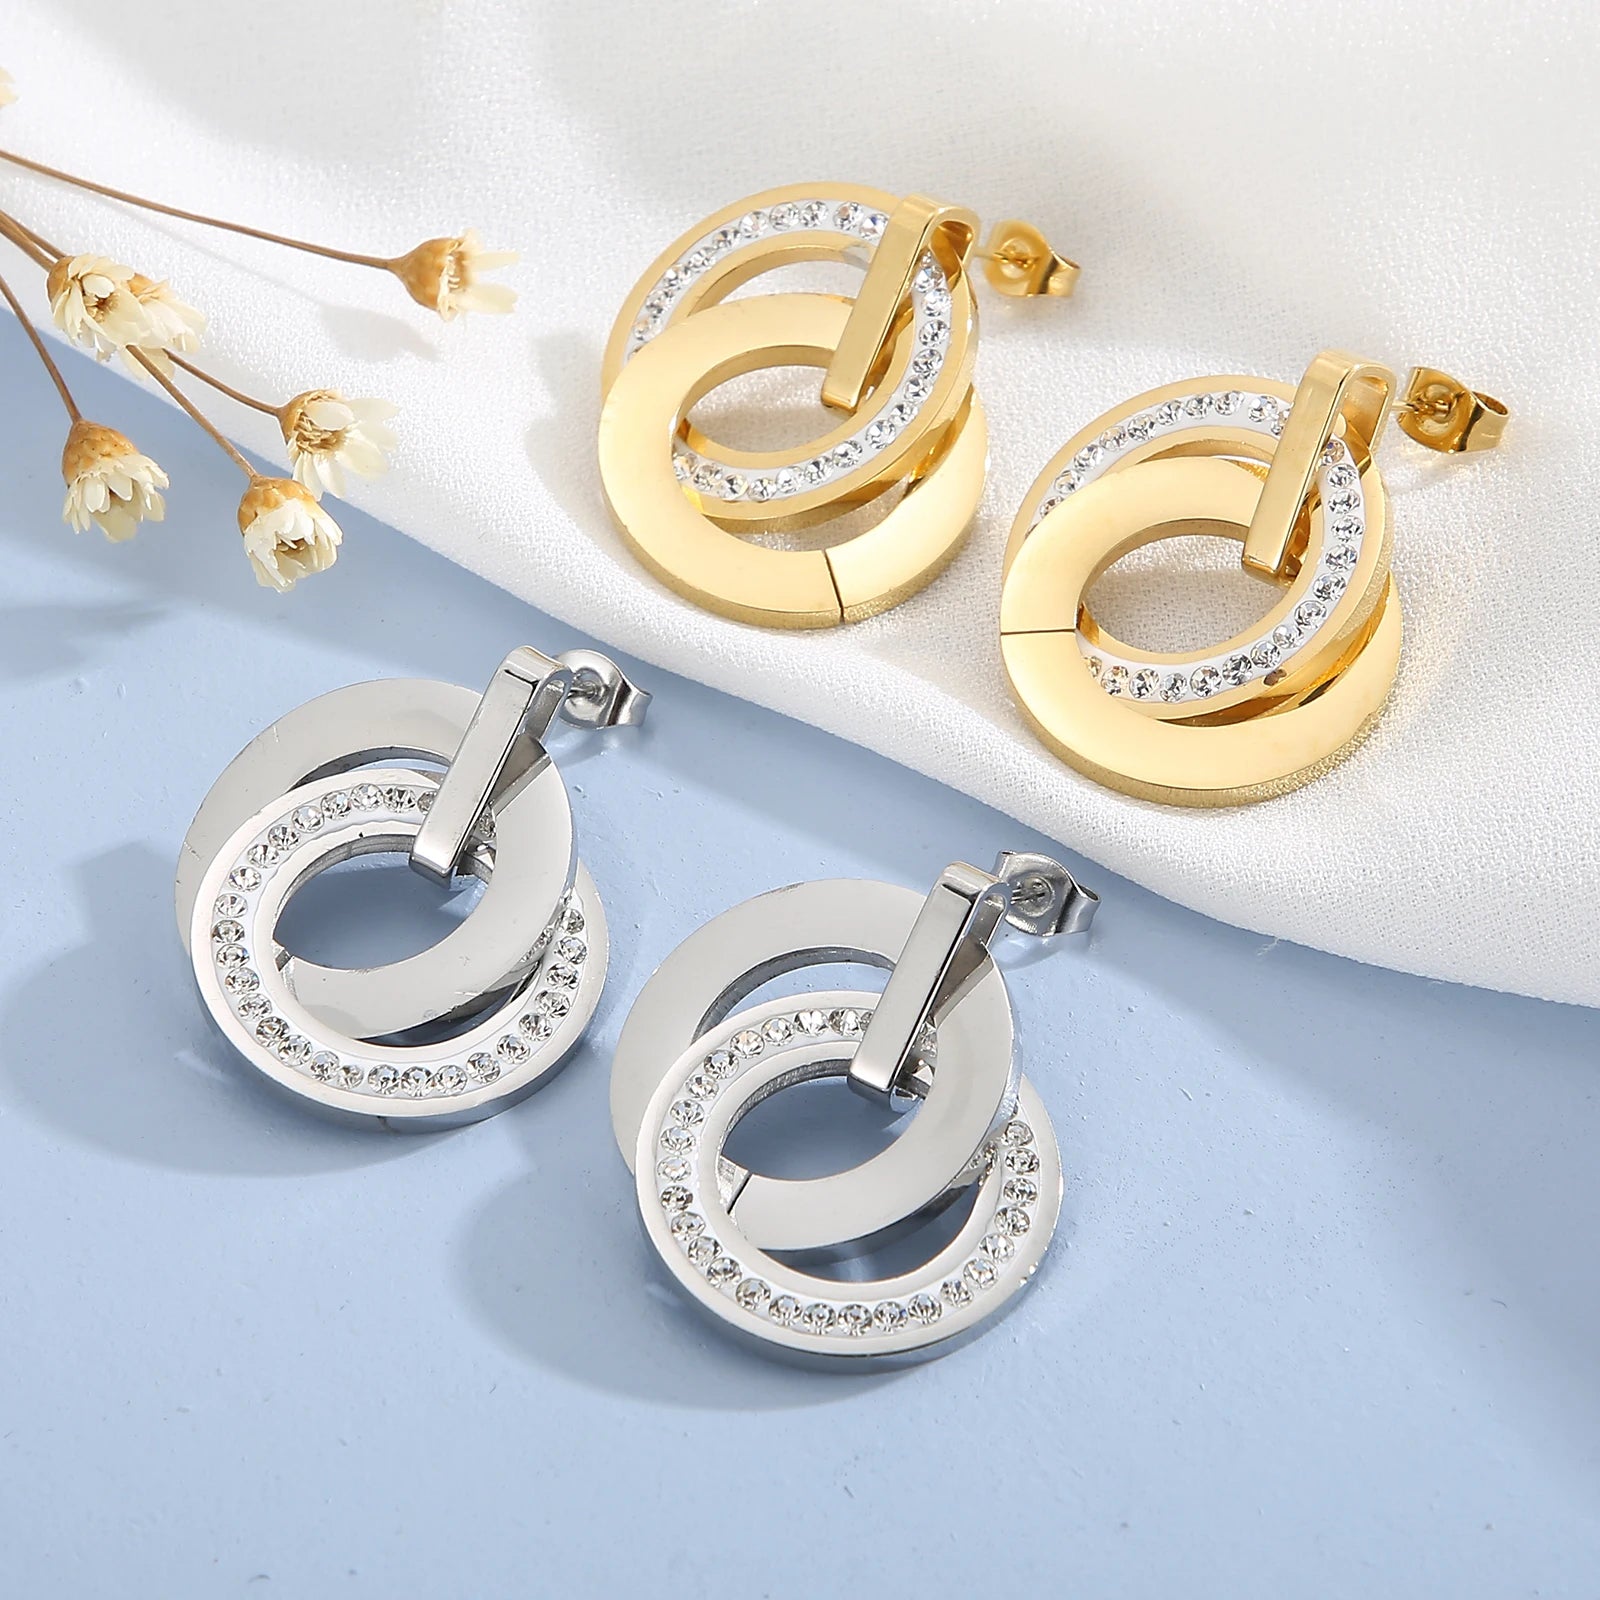 Stainless Steel Jewelry Sets For Women Three Rounds Pendant Necklace Earrings Set Women Fashion Zirconia Wedding Jewelry-Dollar Bargains Online Shopping Australia